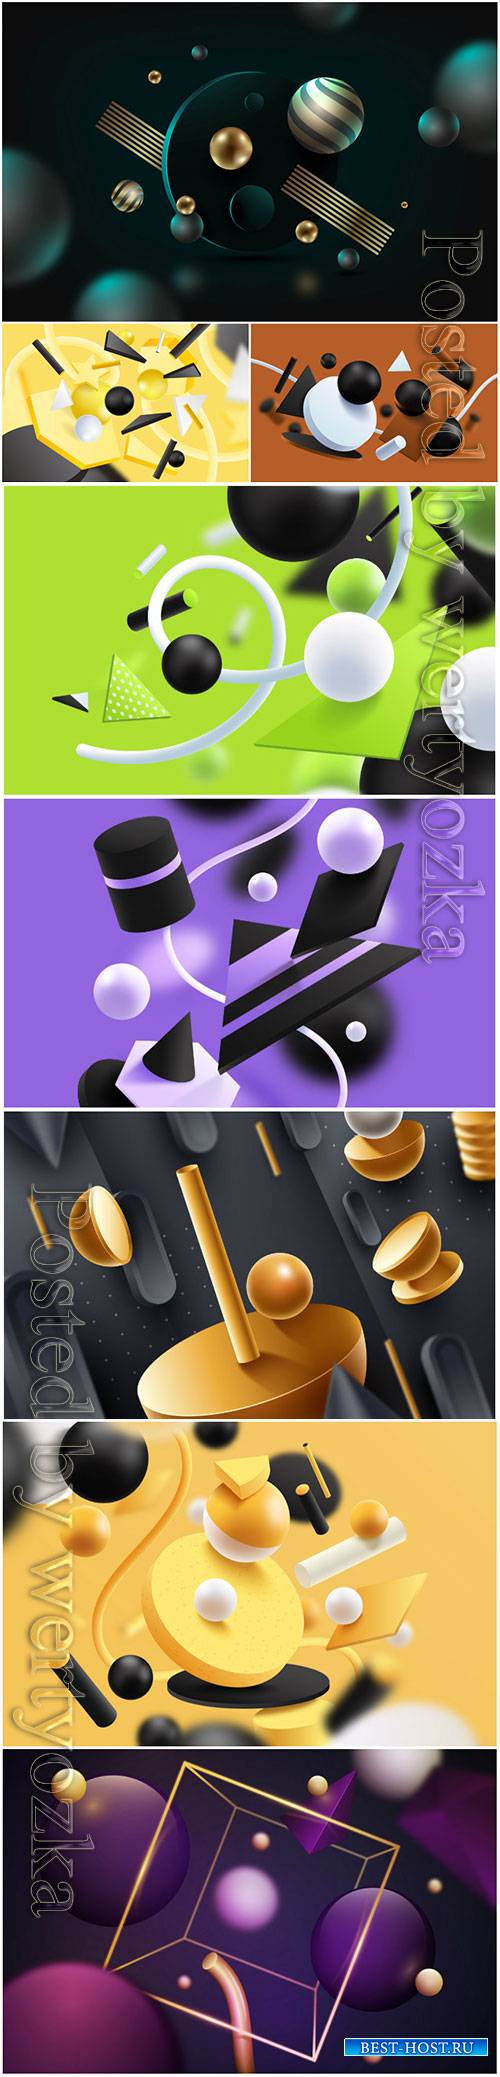 3D models template background with colorful shapes